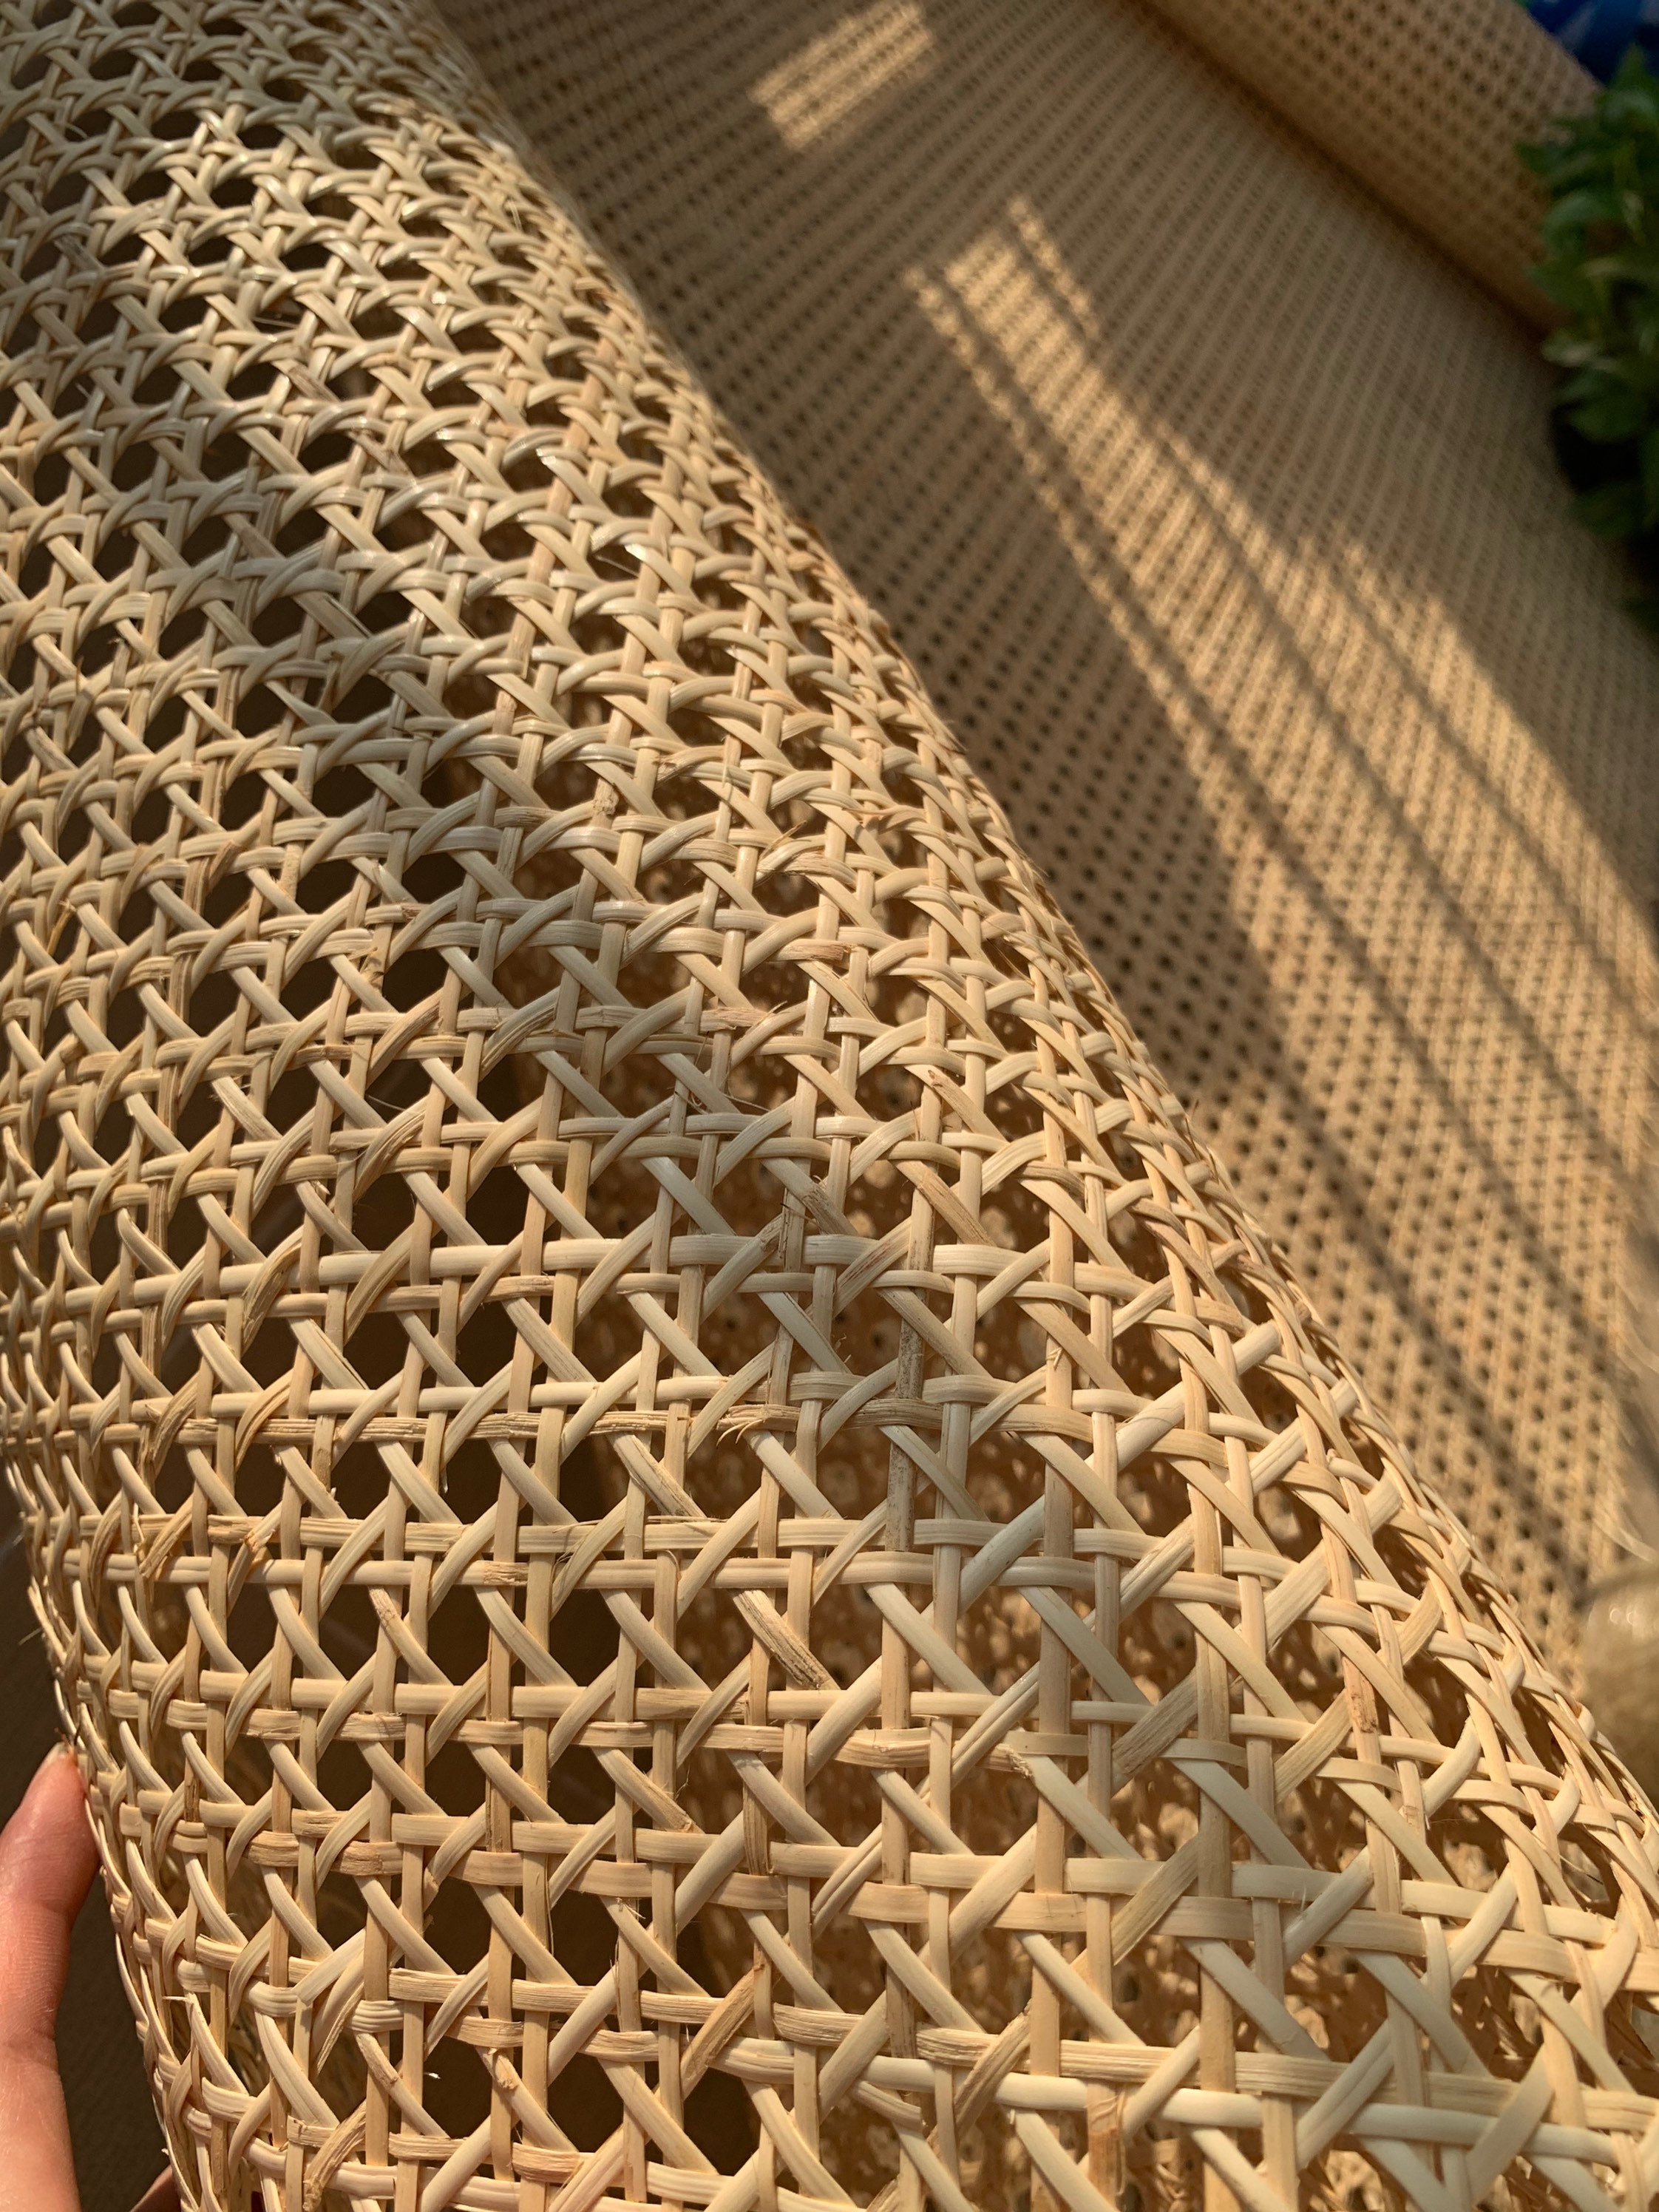 24 Width Square Rattan Cane Webbing Roll 12 Feet Fine Radio Net Mesh Pre  Woven Open for Caning Projects Rattan Fabric Furniture Woven Rattan Sheet